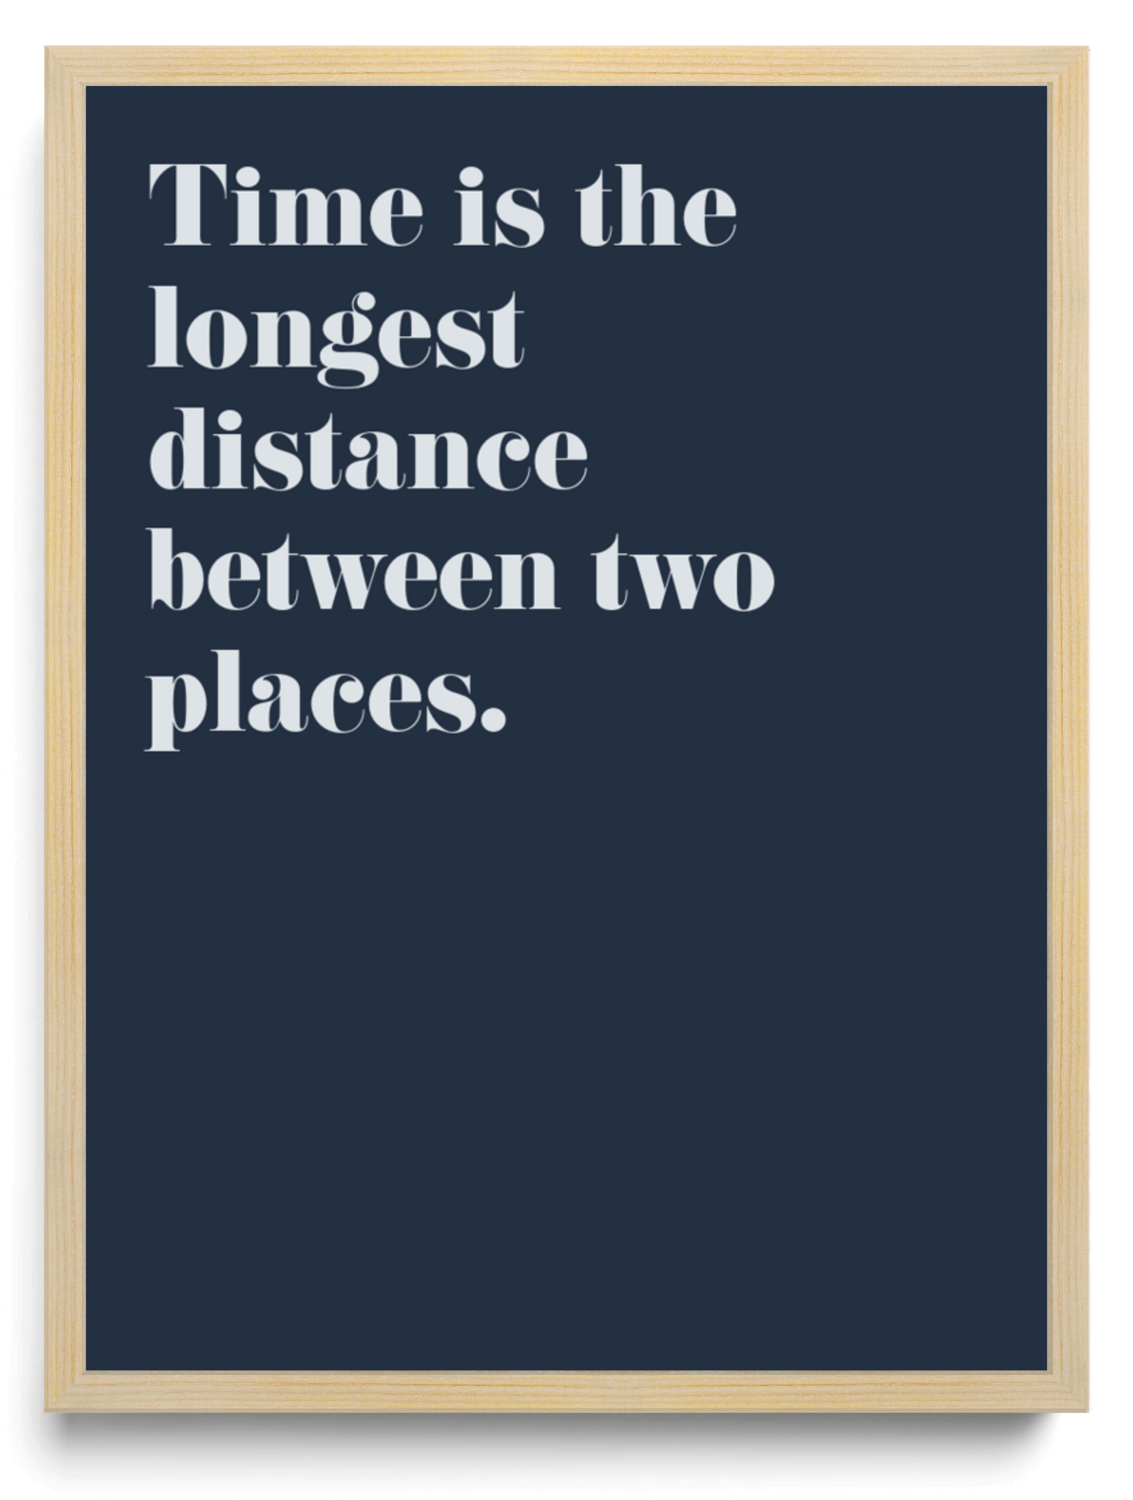 Time is the longest distance between two places framed typographic print